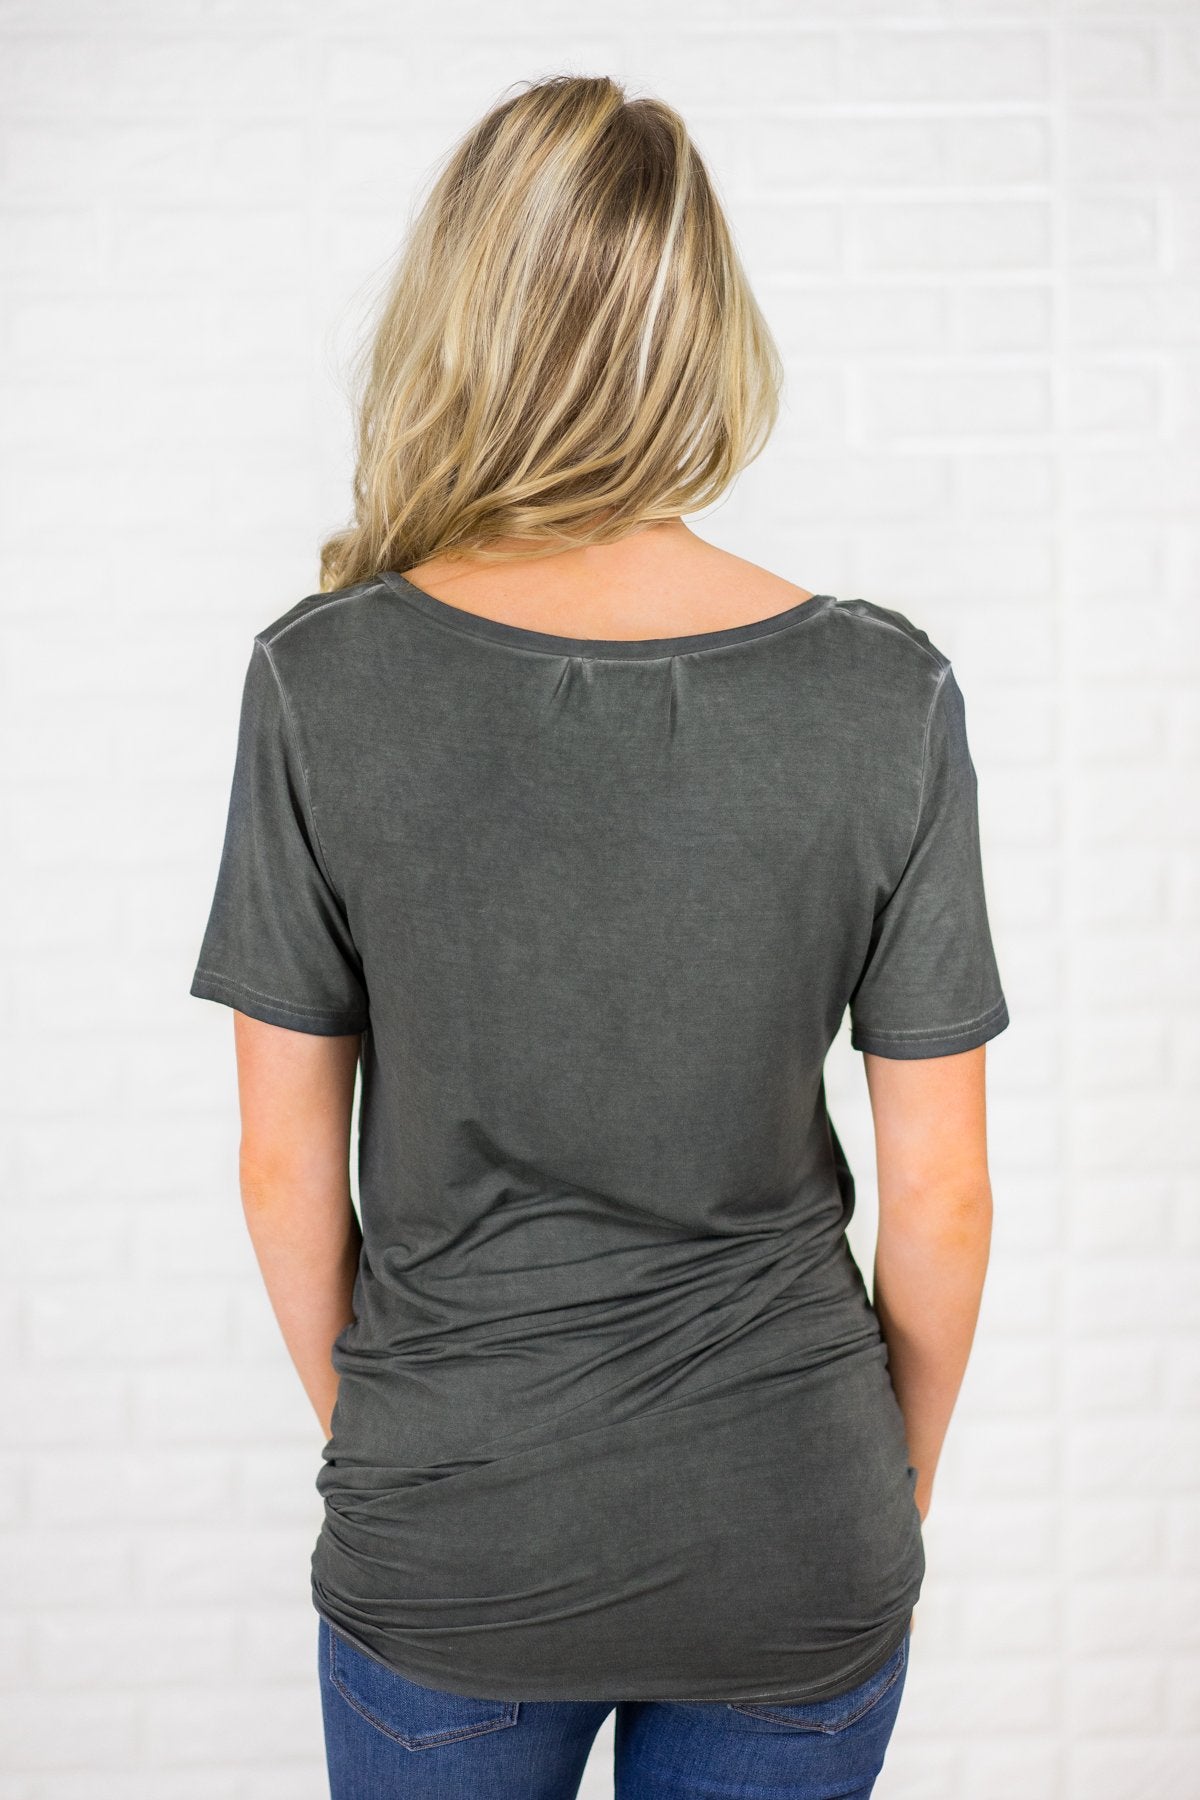 Lost in You Grey V-Neck Tee – The Pulse Boutique